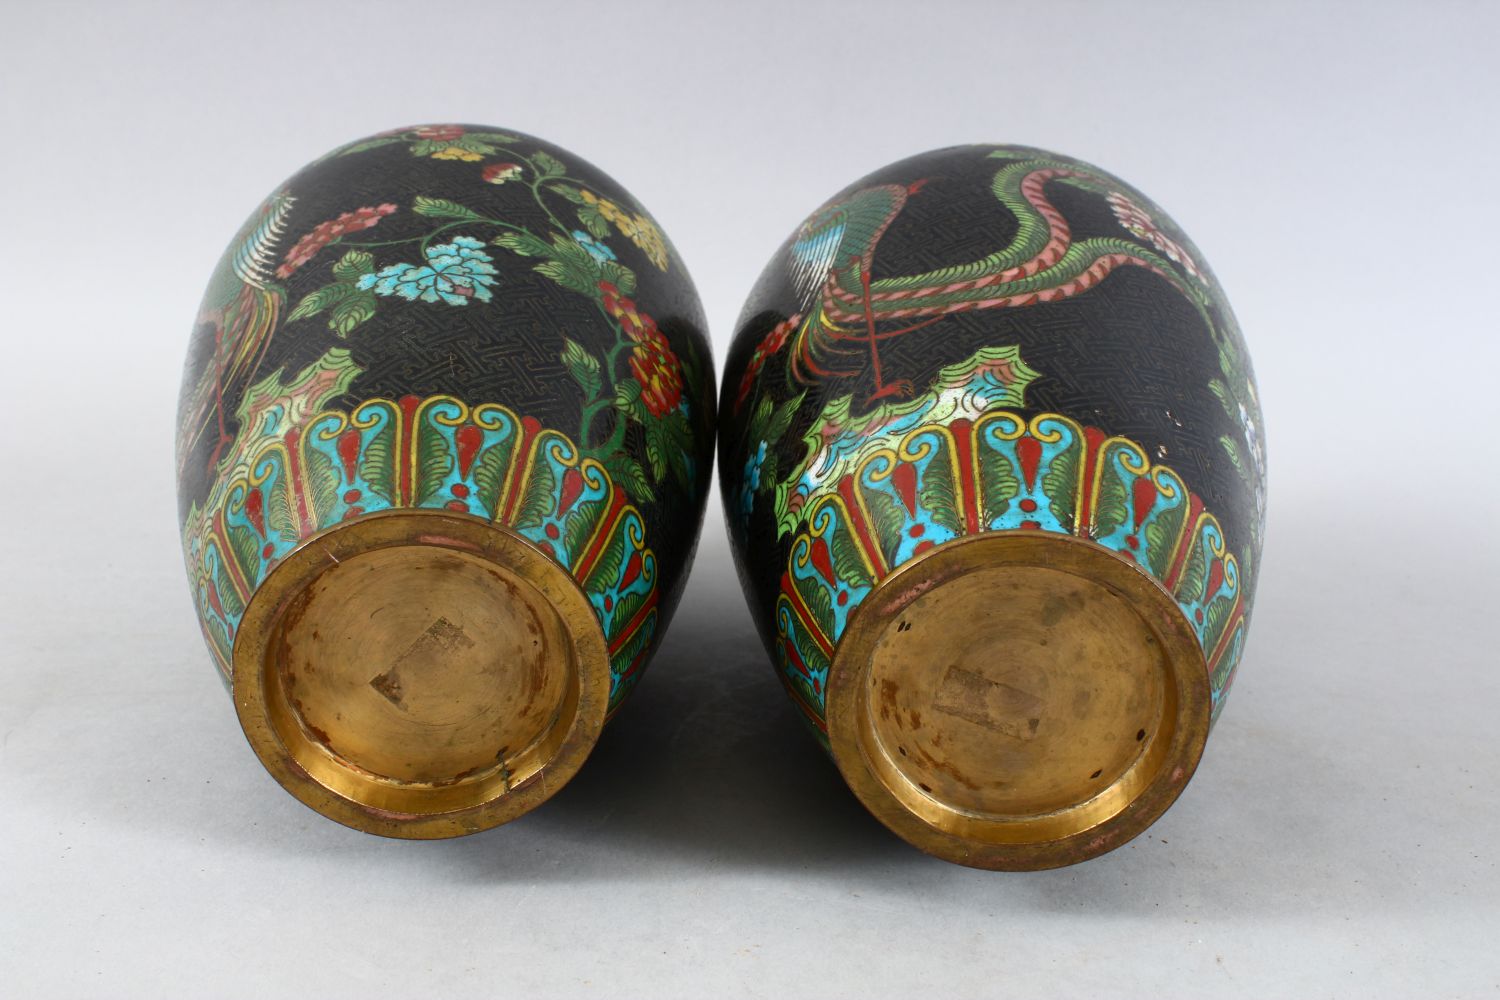 A PAIR OF 20TH CENTURY CHINESE CLOISONNE VASES, both decorated with scenes of phoenix birds - Image 13 of 14